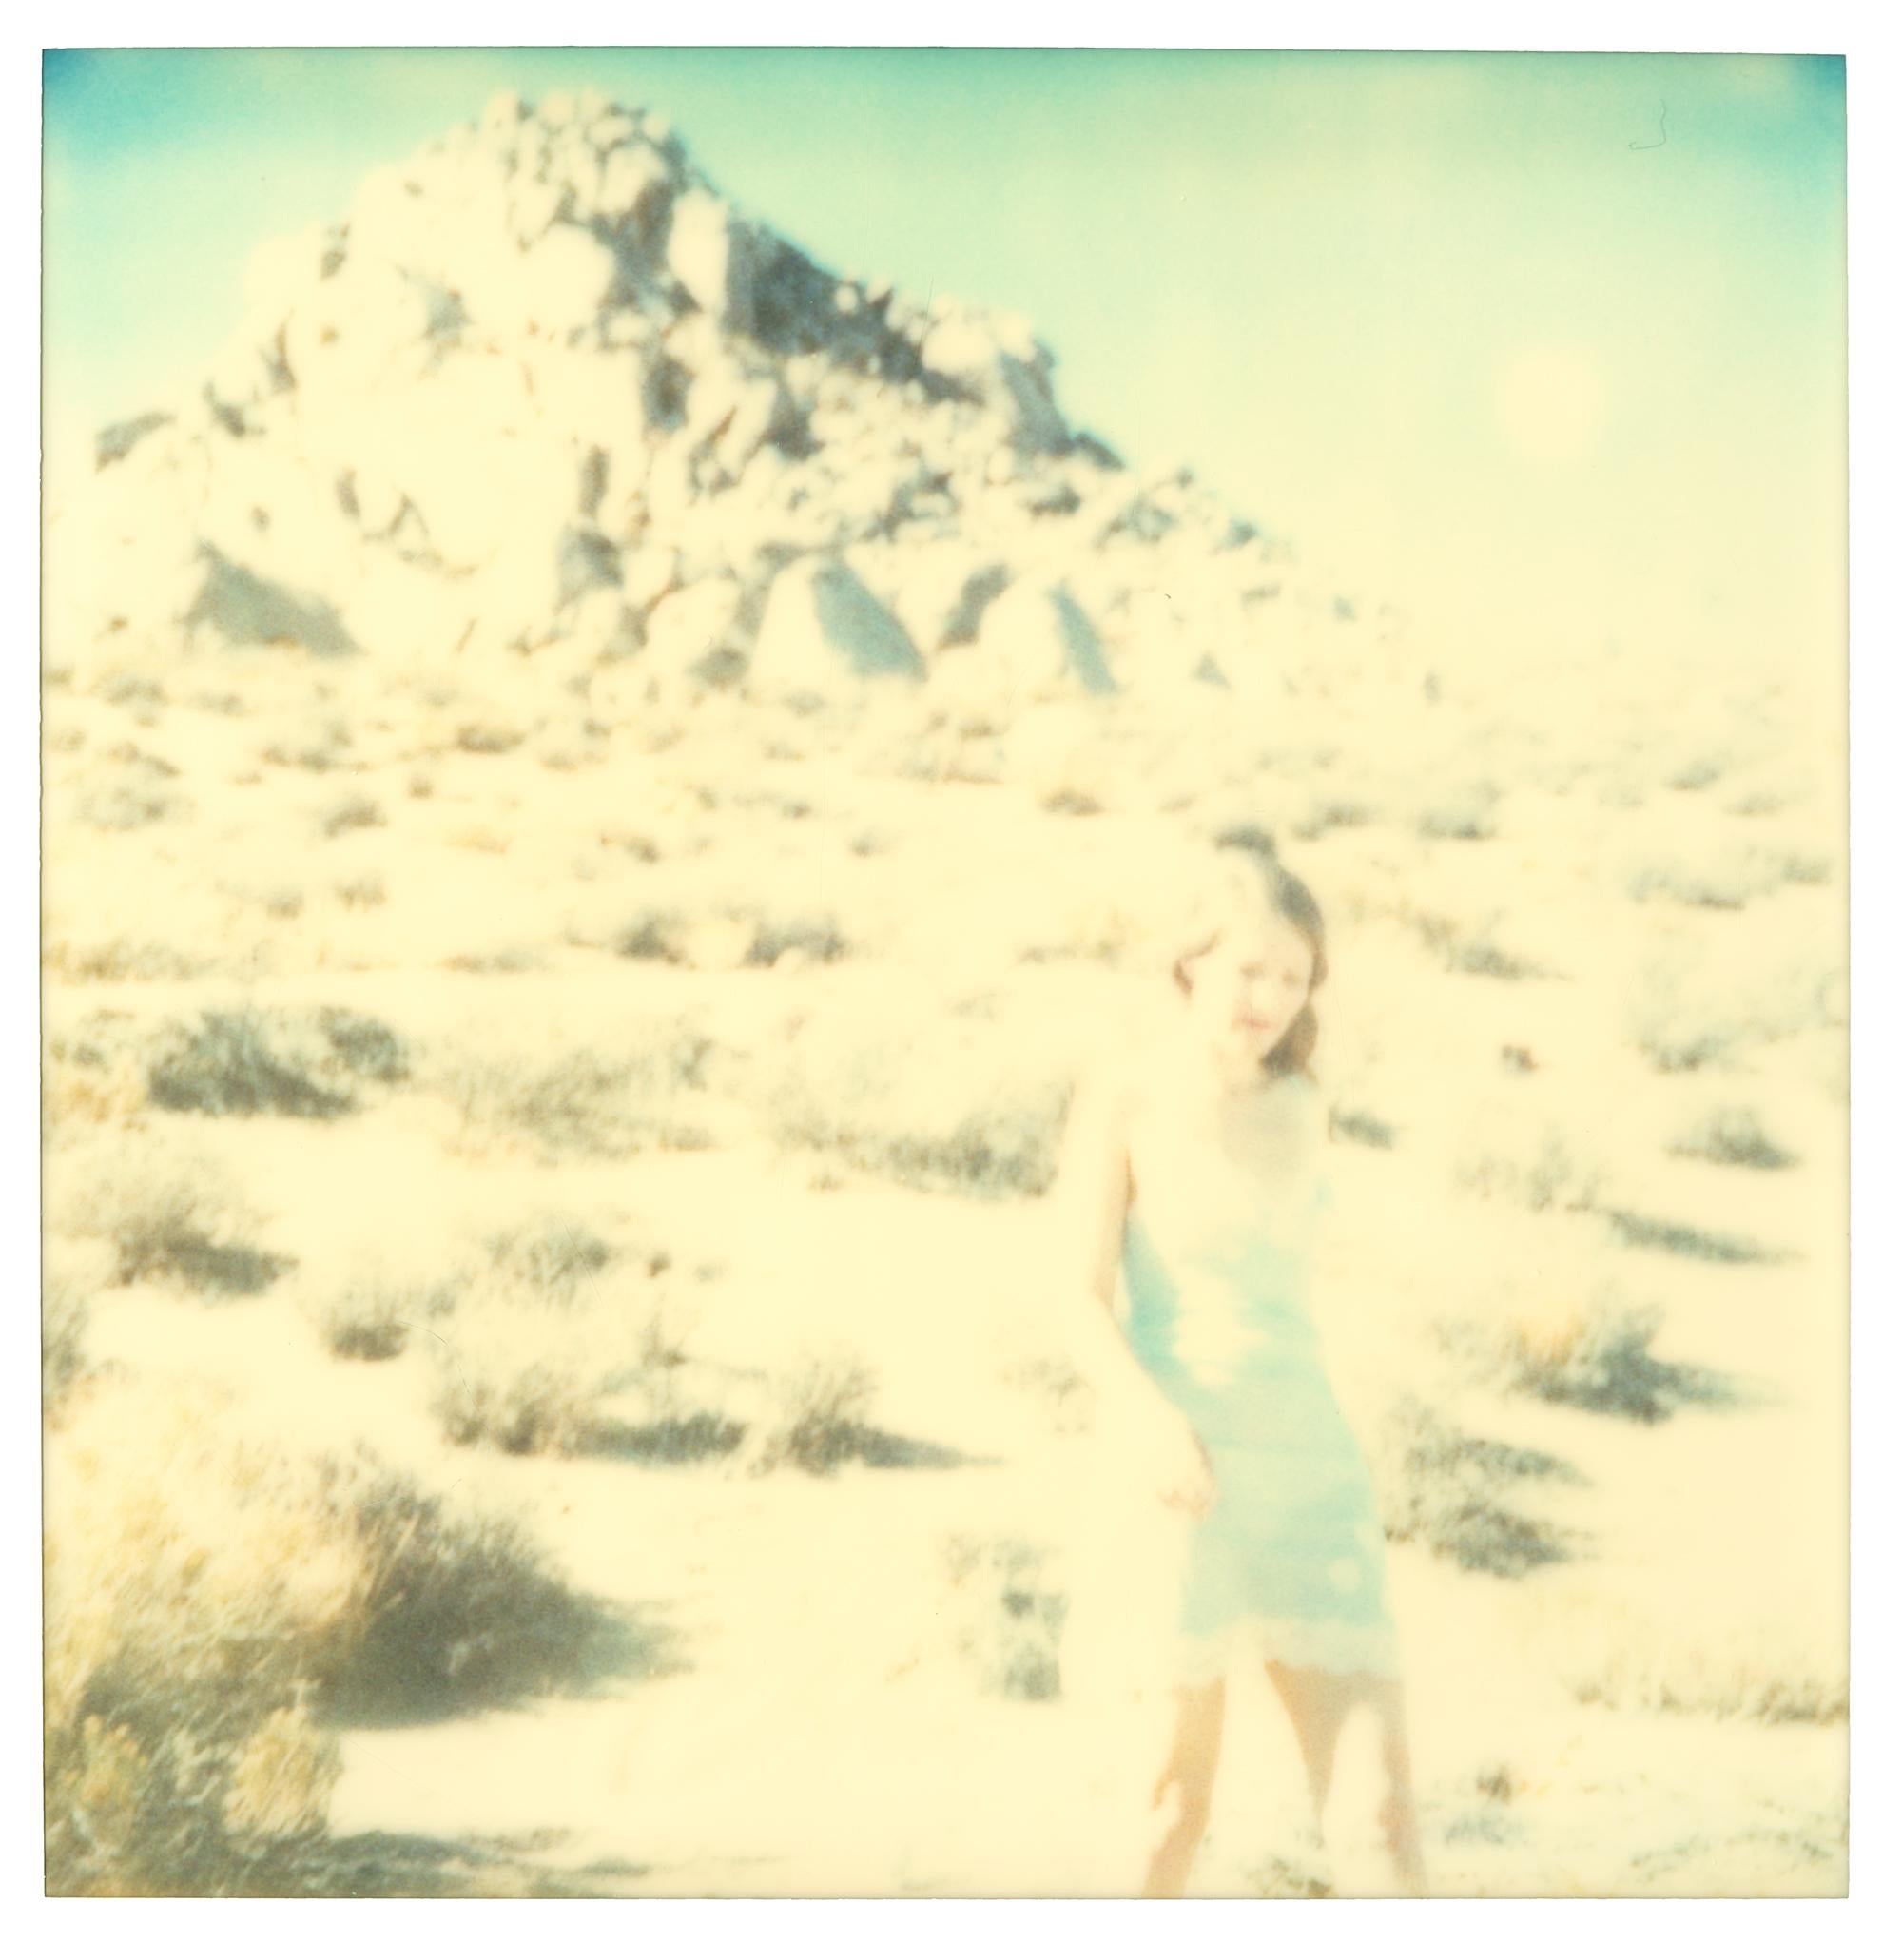 Aimless (Wastelands), triptych, analog, mounted - Polaroid, 21st Century, Color - Contemporary Photograph by Stefanie Schneider